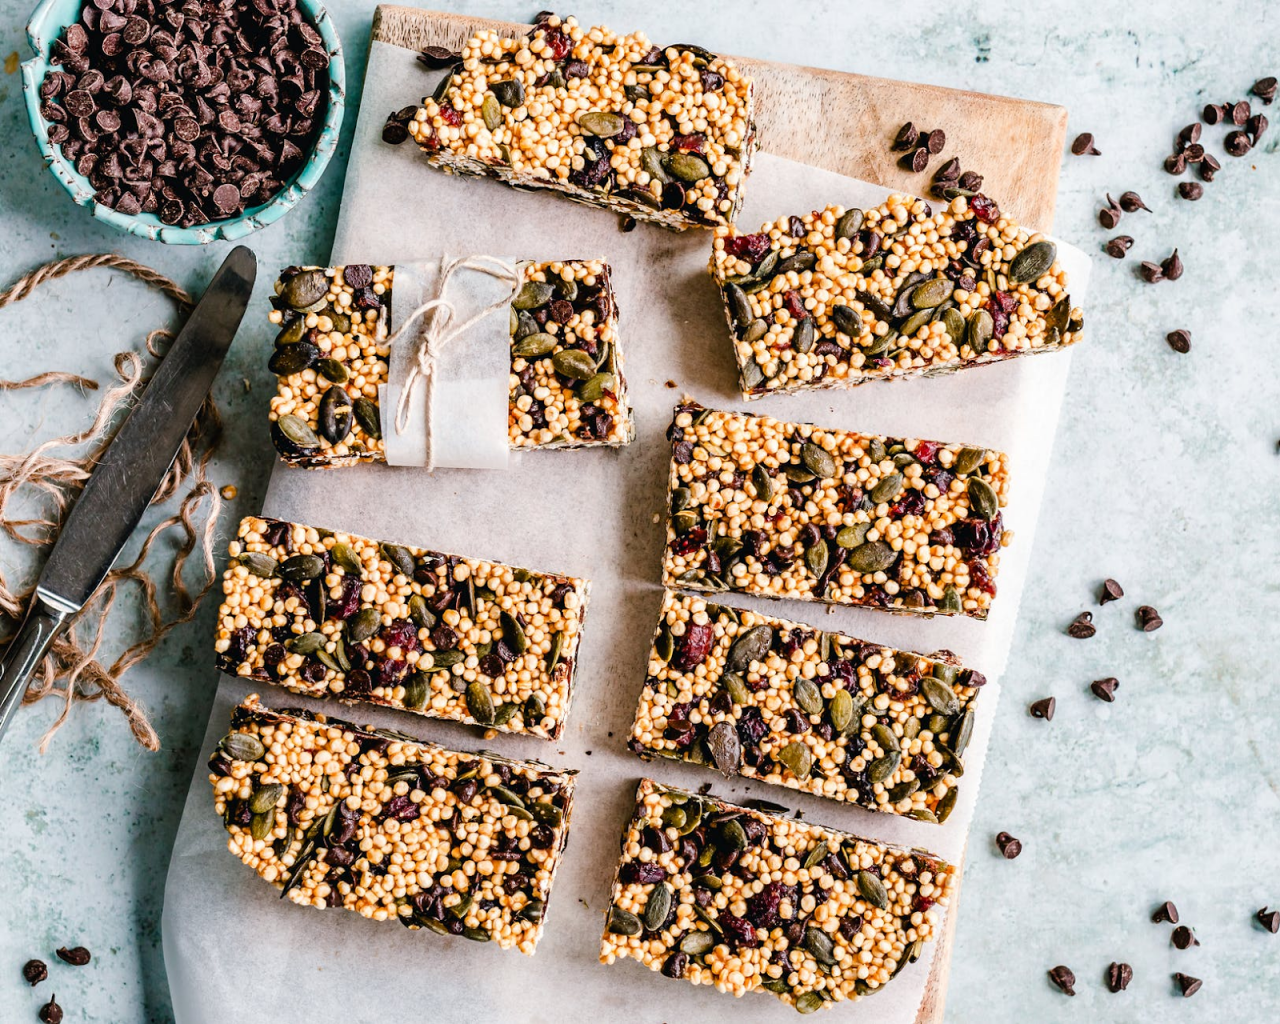 Best Keto Bars To Satiate Your Hunger Pangs
